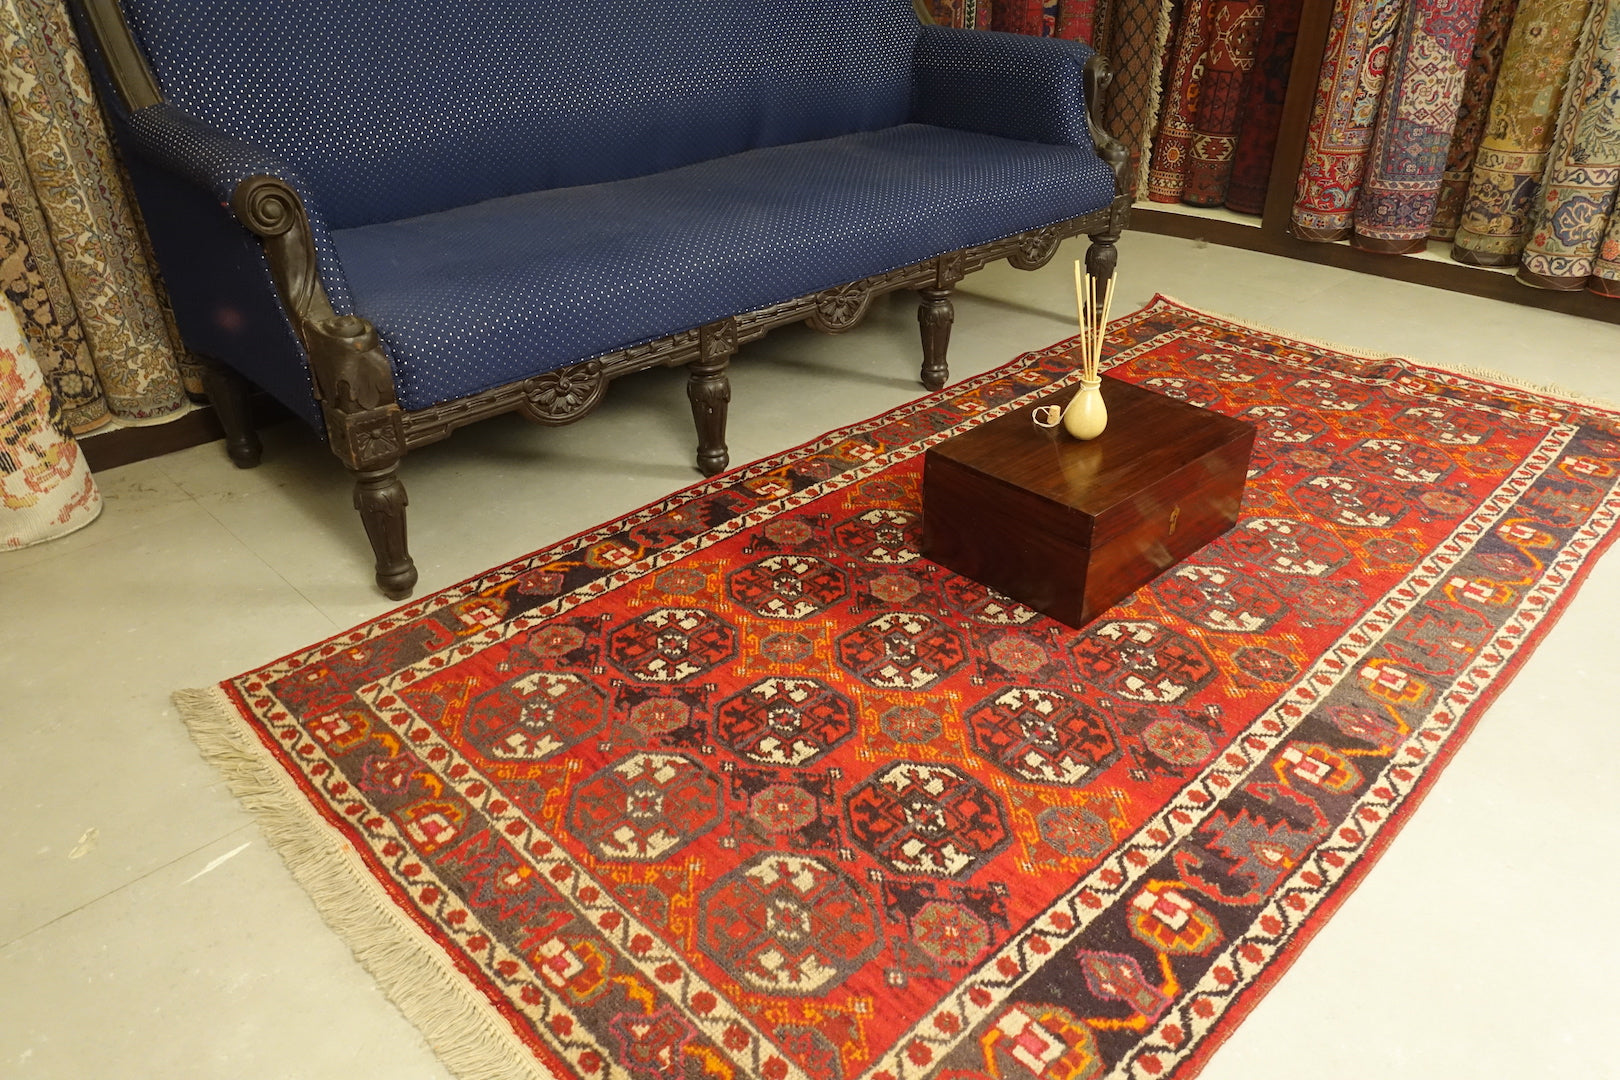 A 3.75 feet by 7.5 feet antique turkoman rug, the colours used on the rug are deep red,blue,yellow,pink and rust.